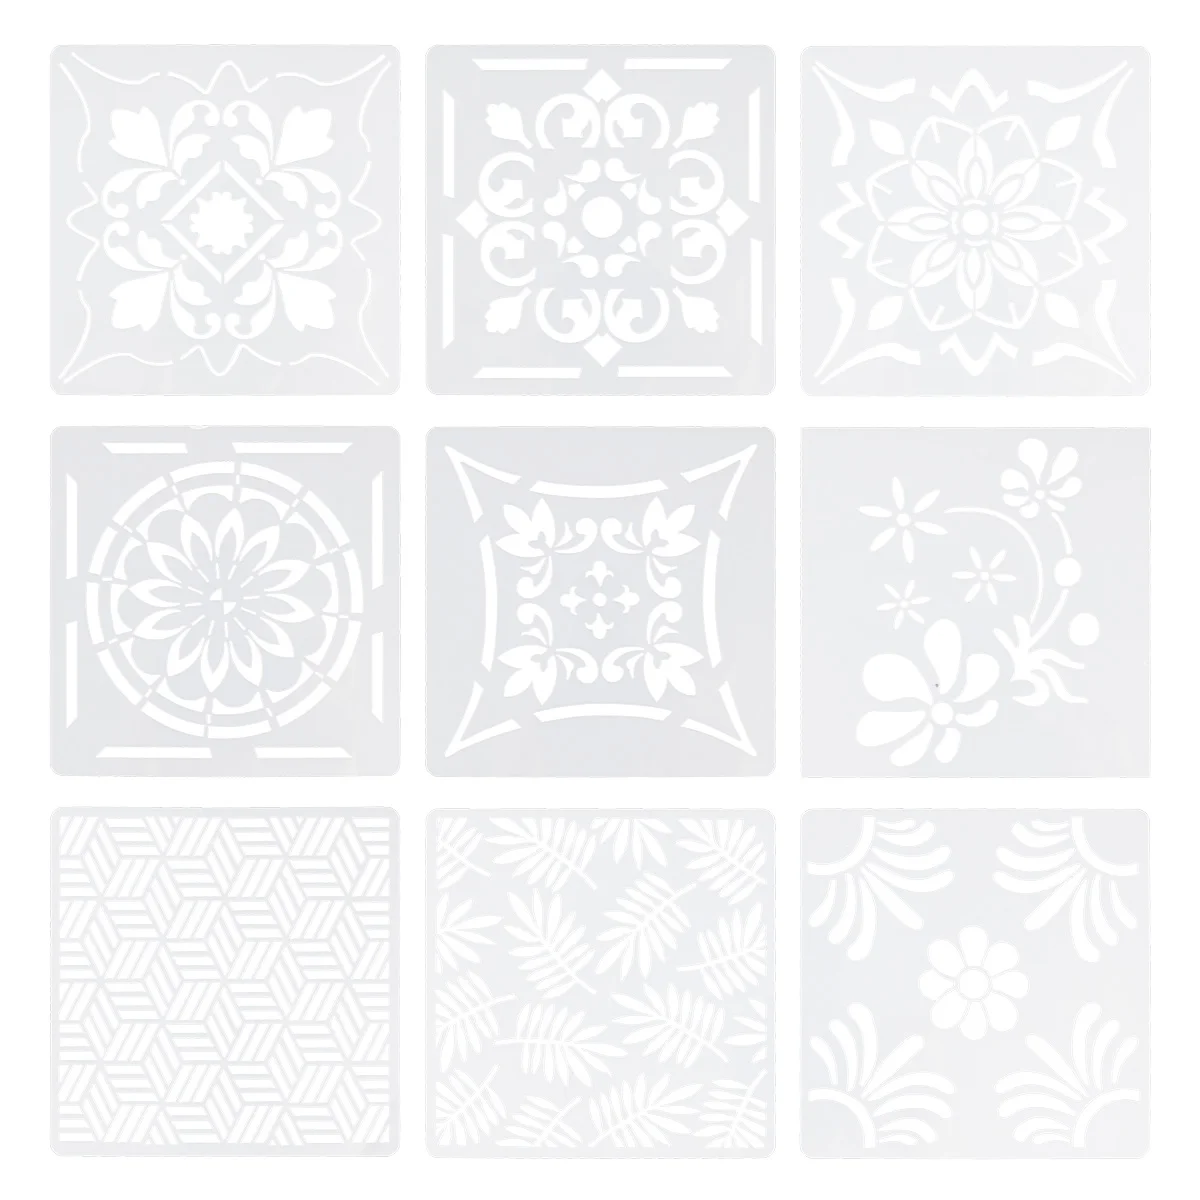 Painting Template Stencil Drawing Stencils Set Hollow Vintage for Sturdy Craft DIY Template Applique Mold Stencil Tool 36pcs mandala template painting drawing stencils for craft stone painting projects